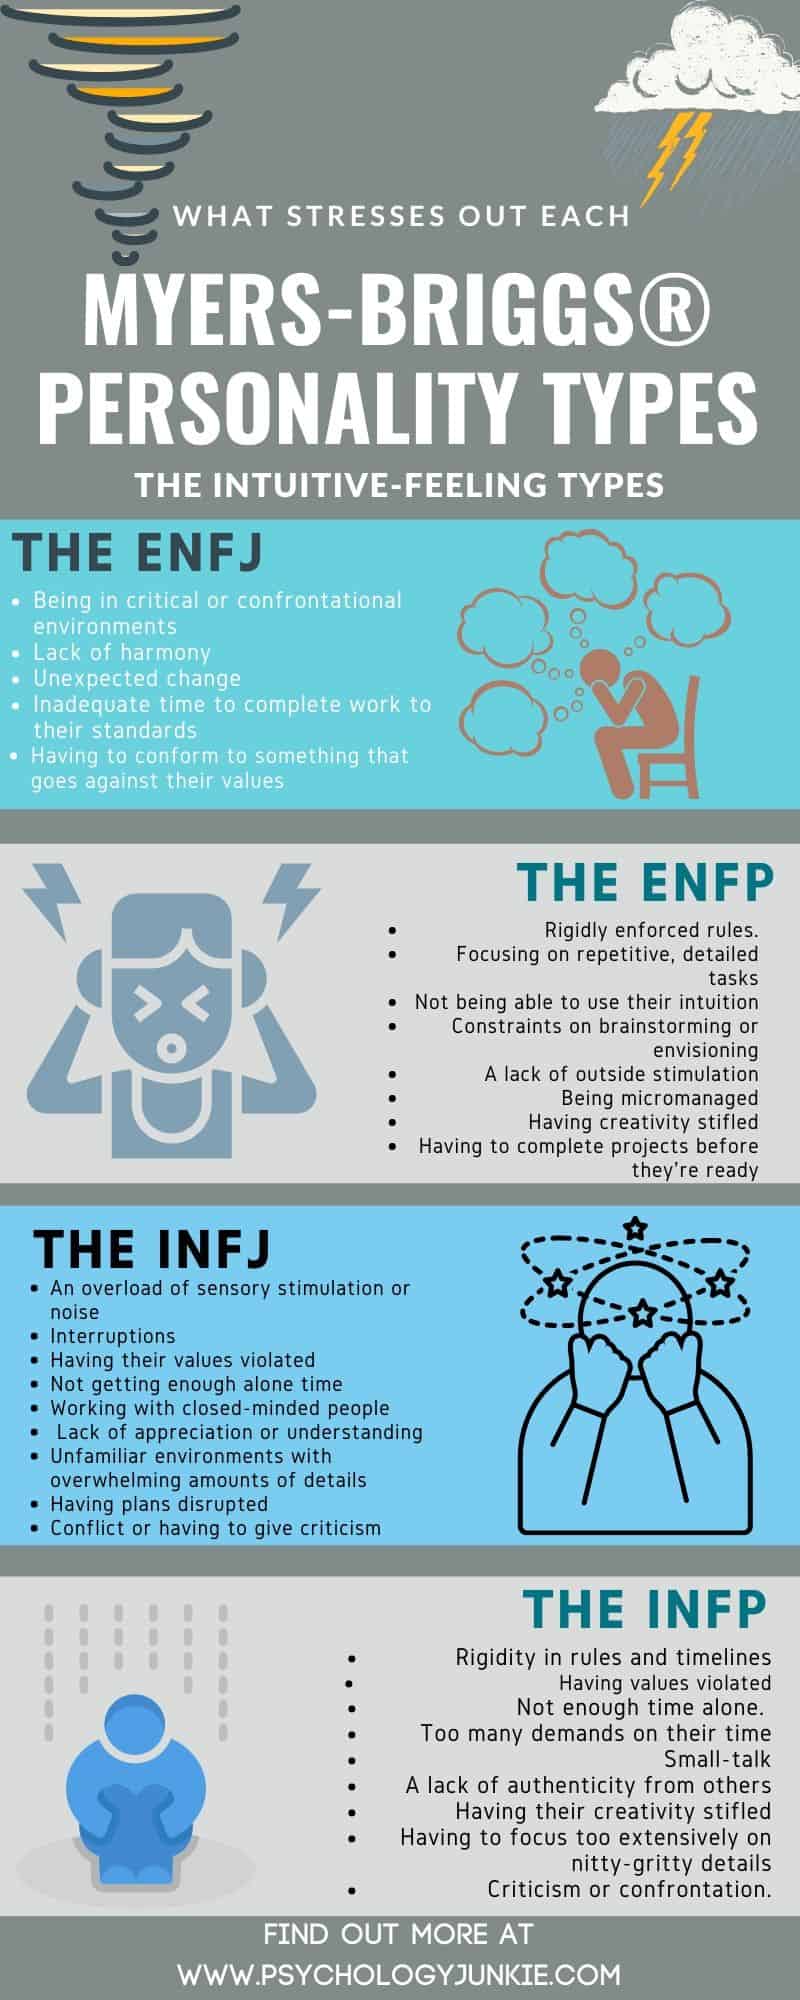 Find out what creates stress for Intuitive-Feeling personality types. #MBTI #Personality #INFJ #INFP